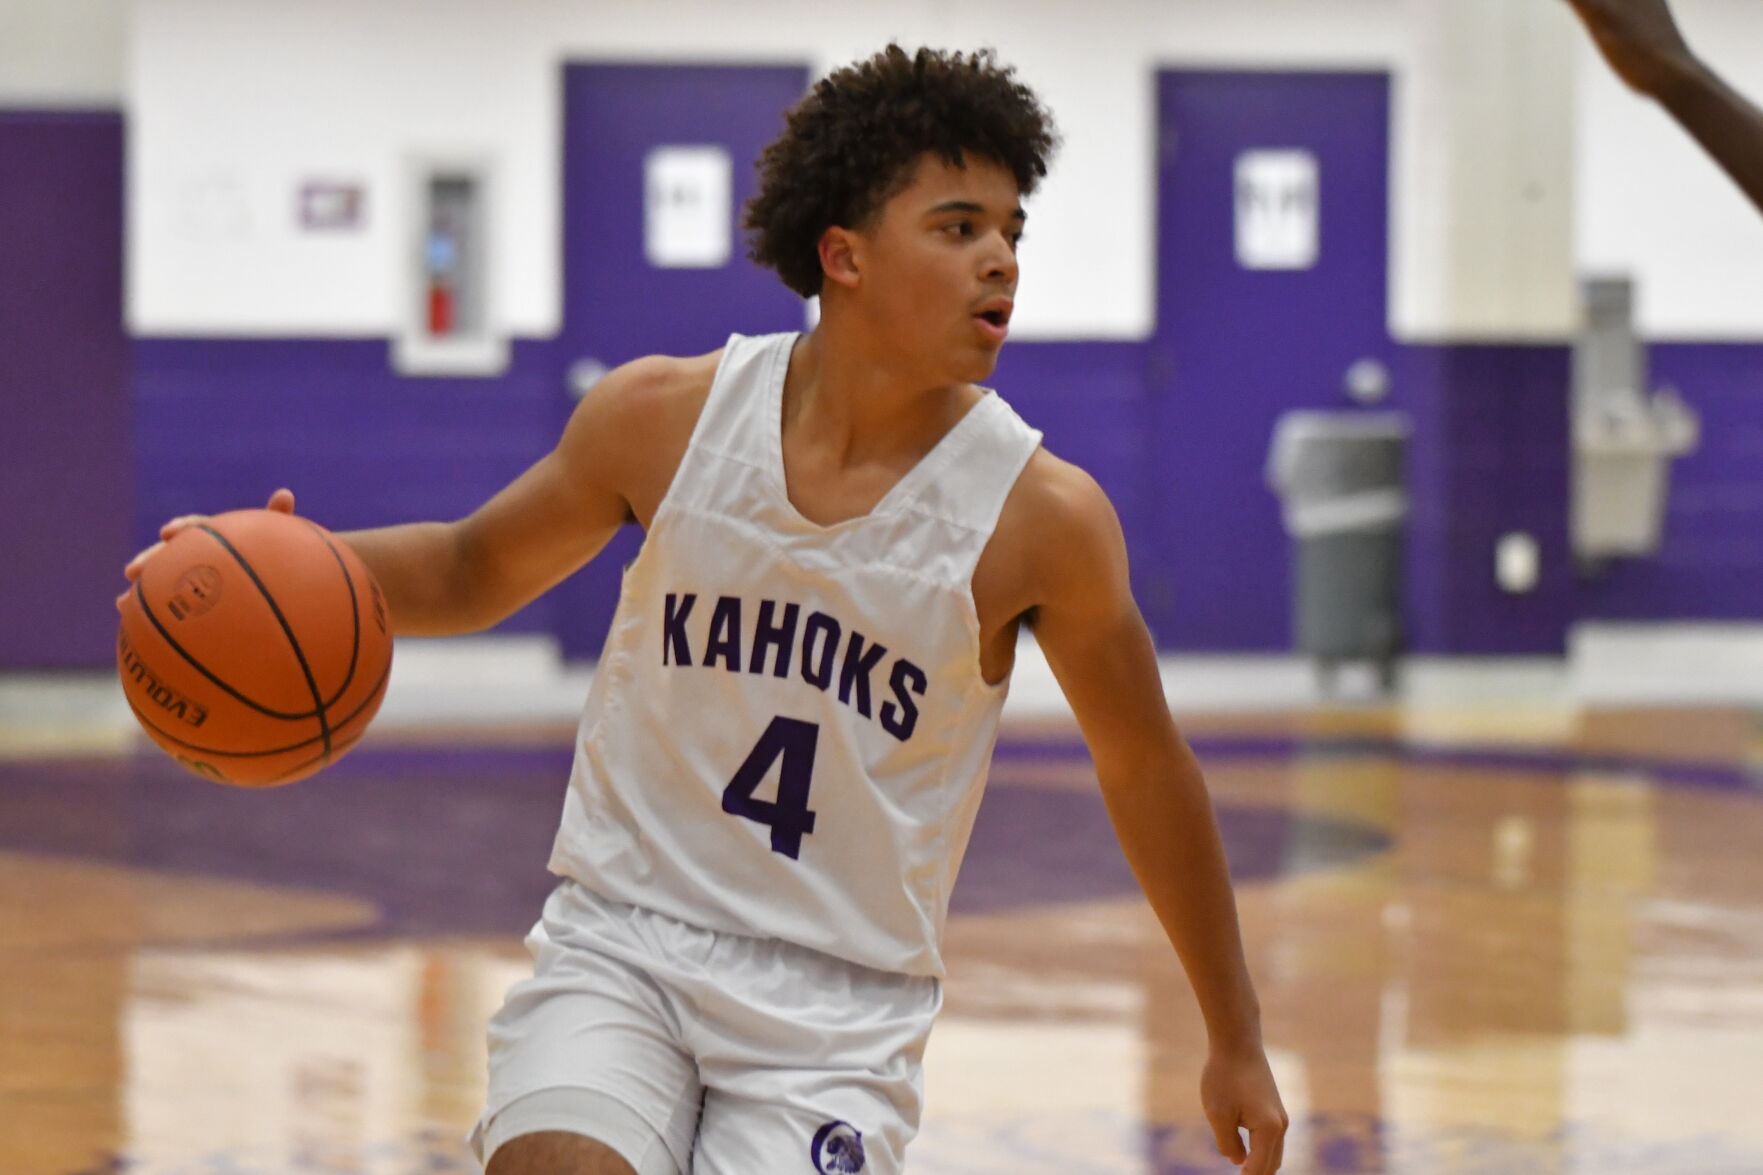 Collinsville Kahoks Look to Dominate IHSA Class 4A Boys Basketball Regional with Top Seed and Stellar Team